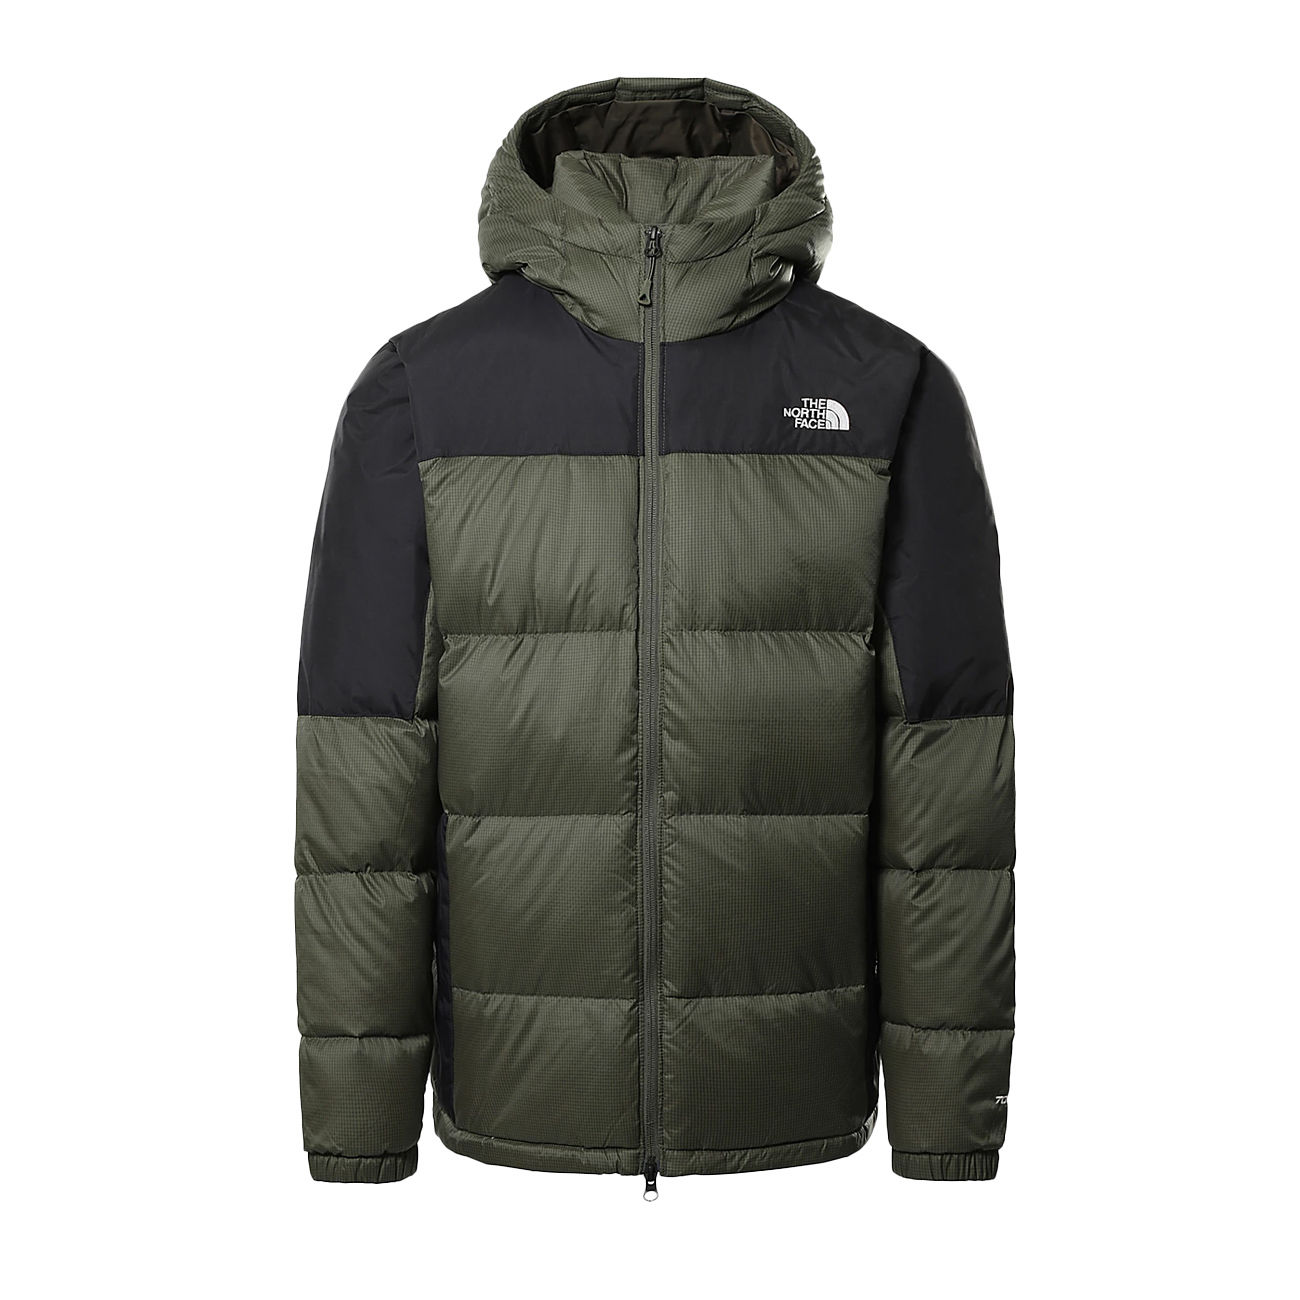 THE NORTH FACE Diablo Down Hoodie /military olive noir 2022-2023 Sportswear Homme  Doudoune homme